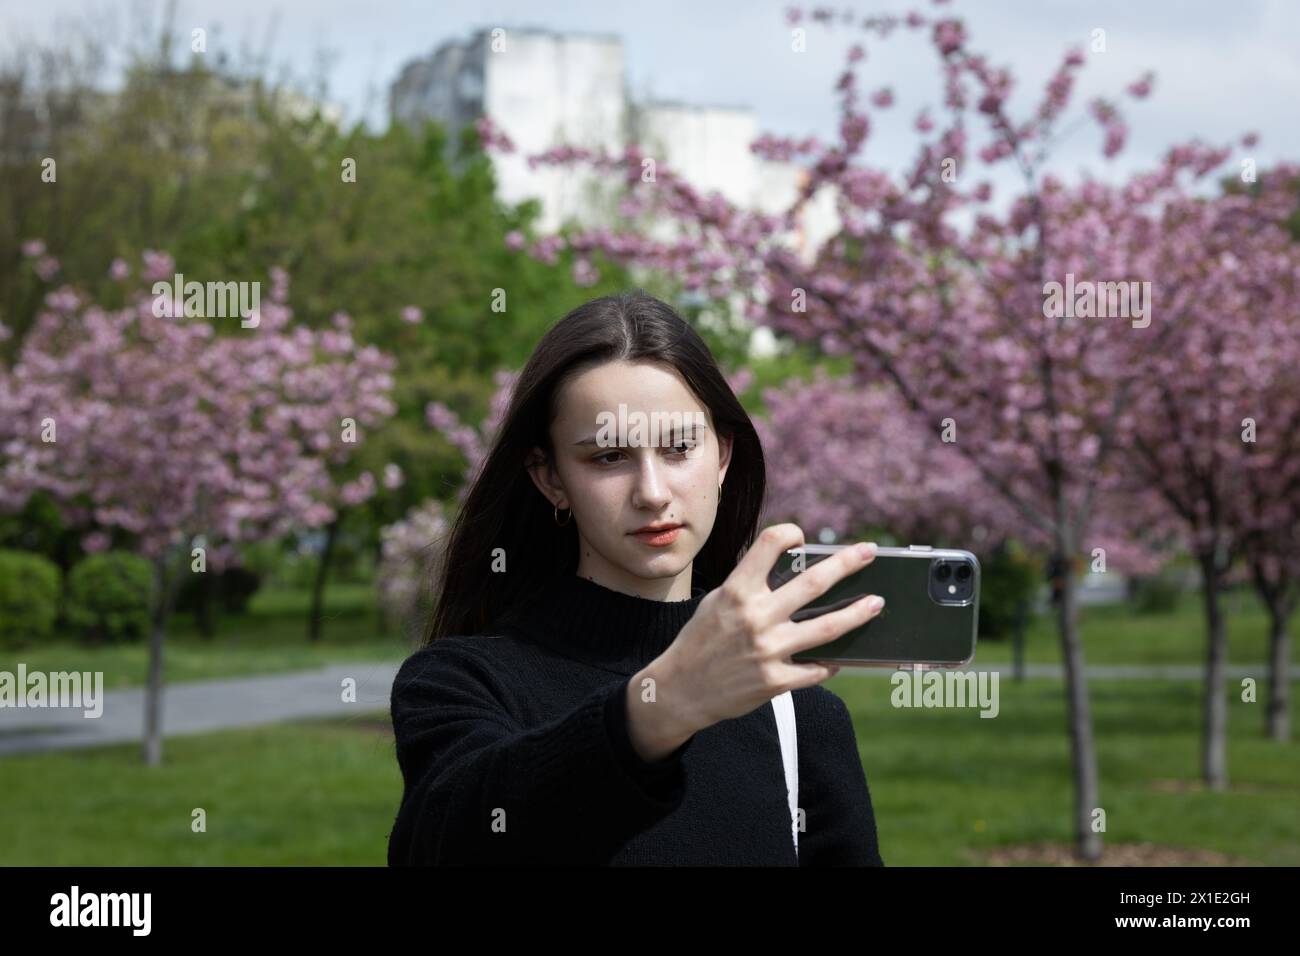 A girl takes a selfie against the backdrop of blooming sakura trees in Kyoto Park in Kyiv. Stock Photo